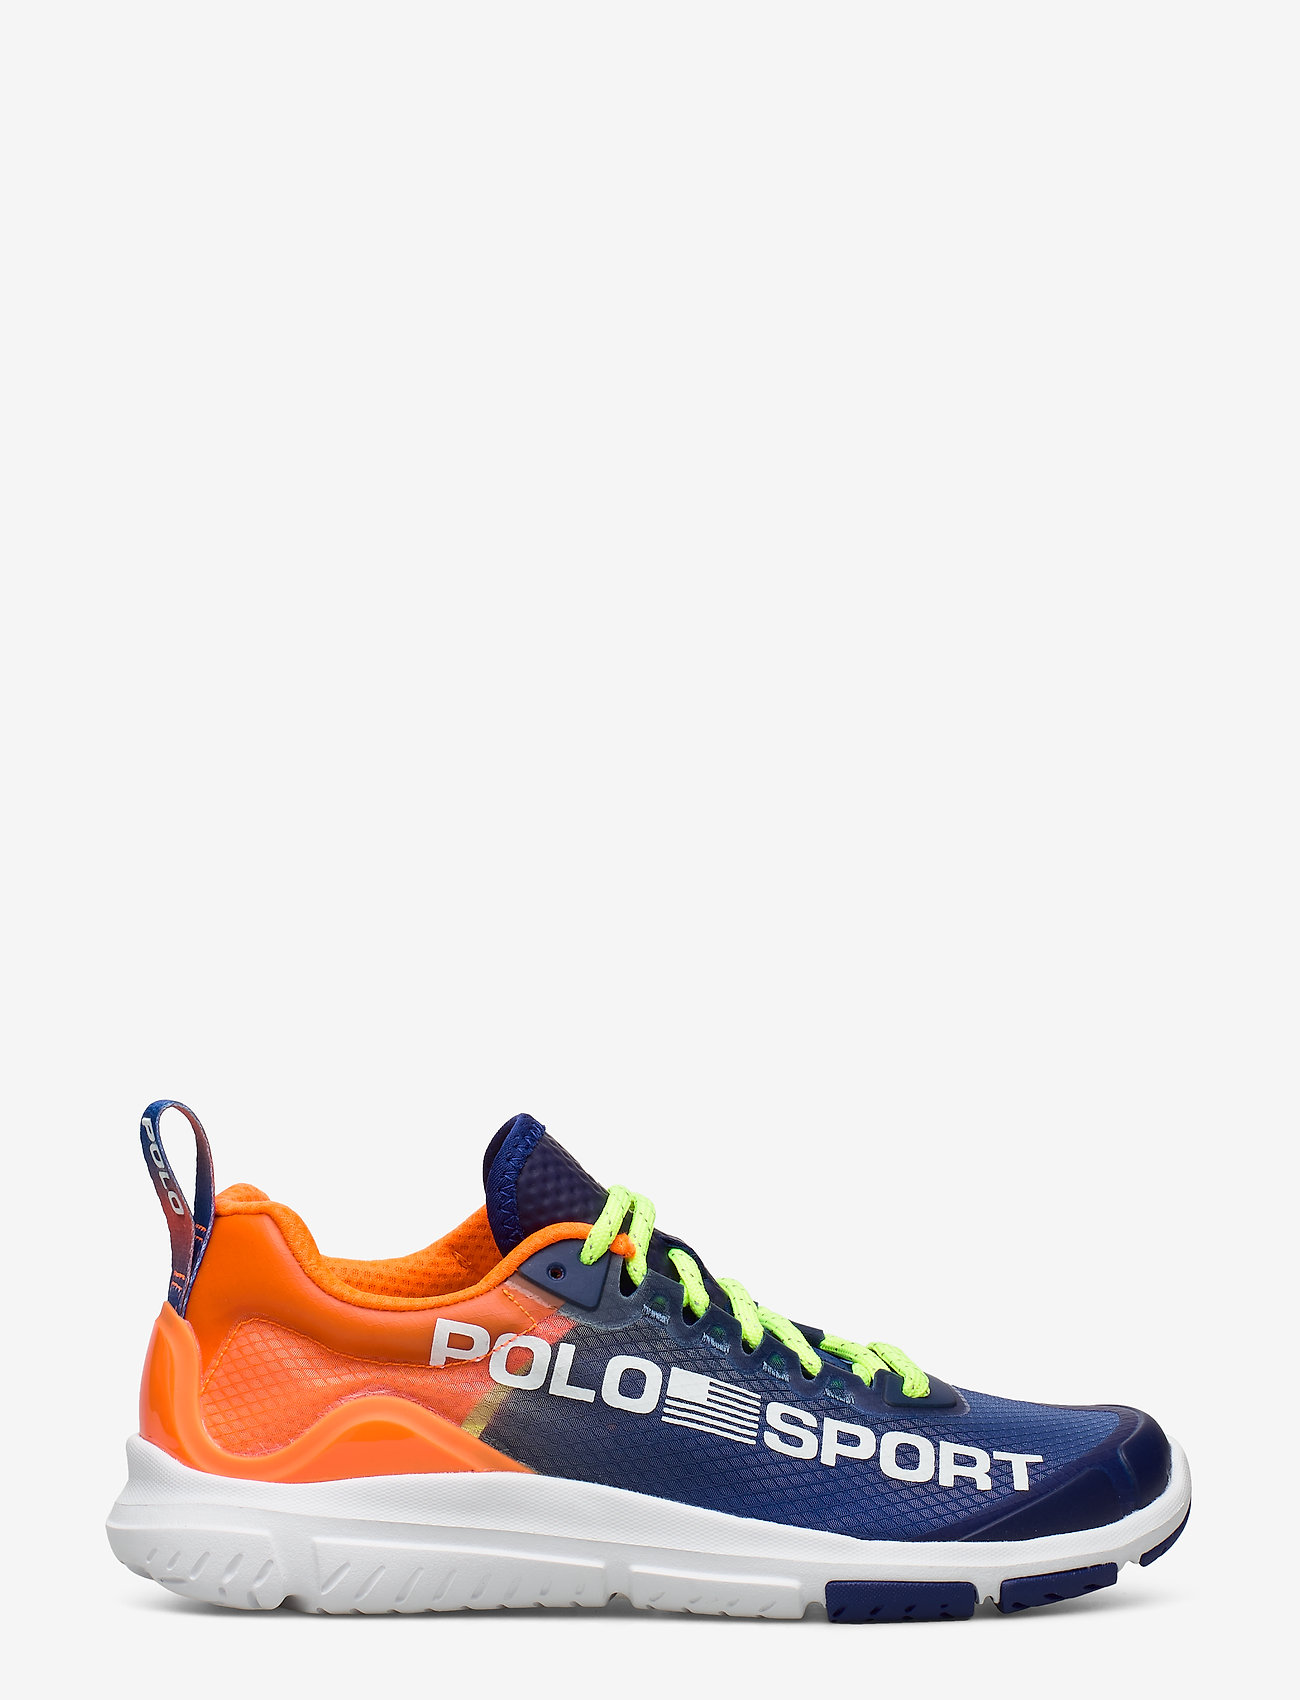 polo sport shoes for womens